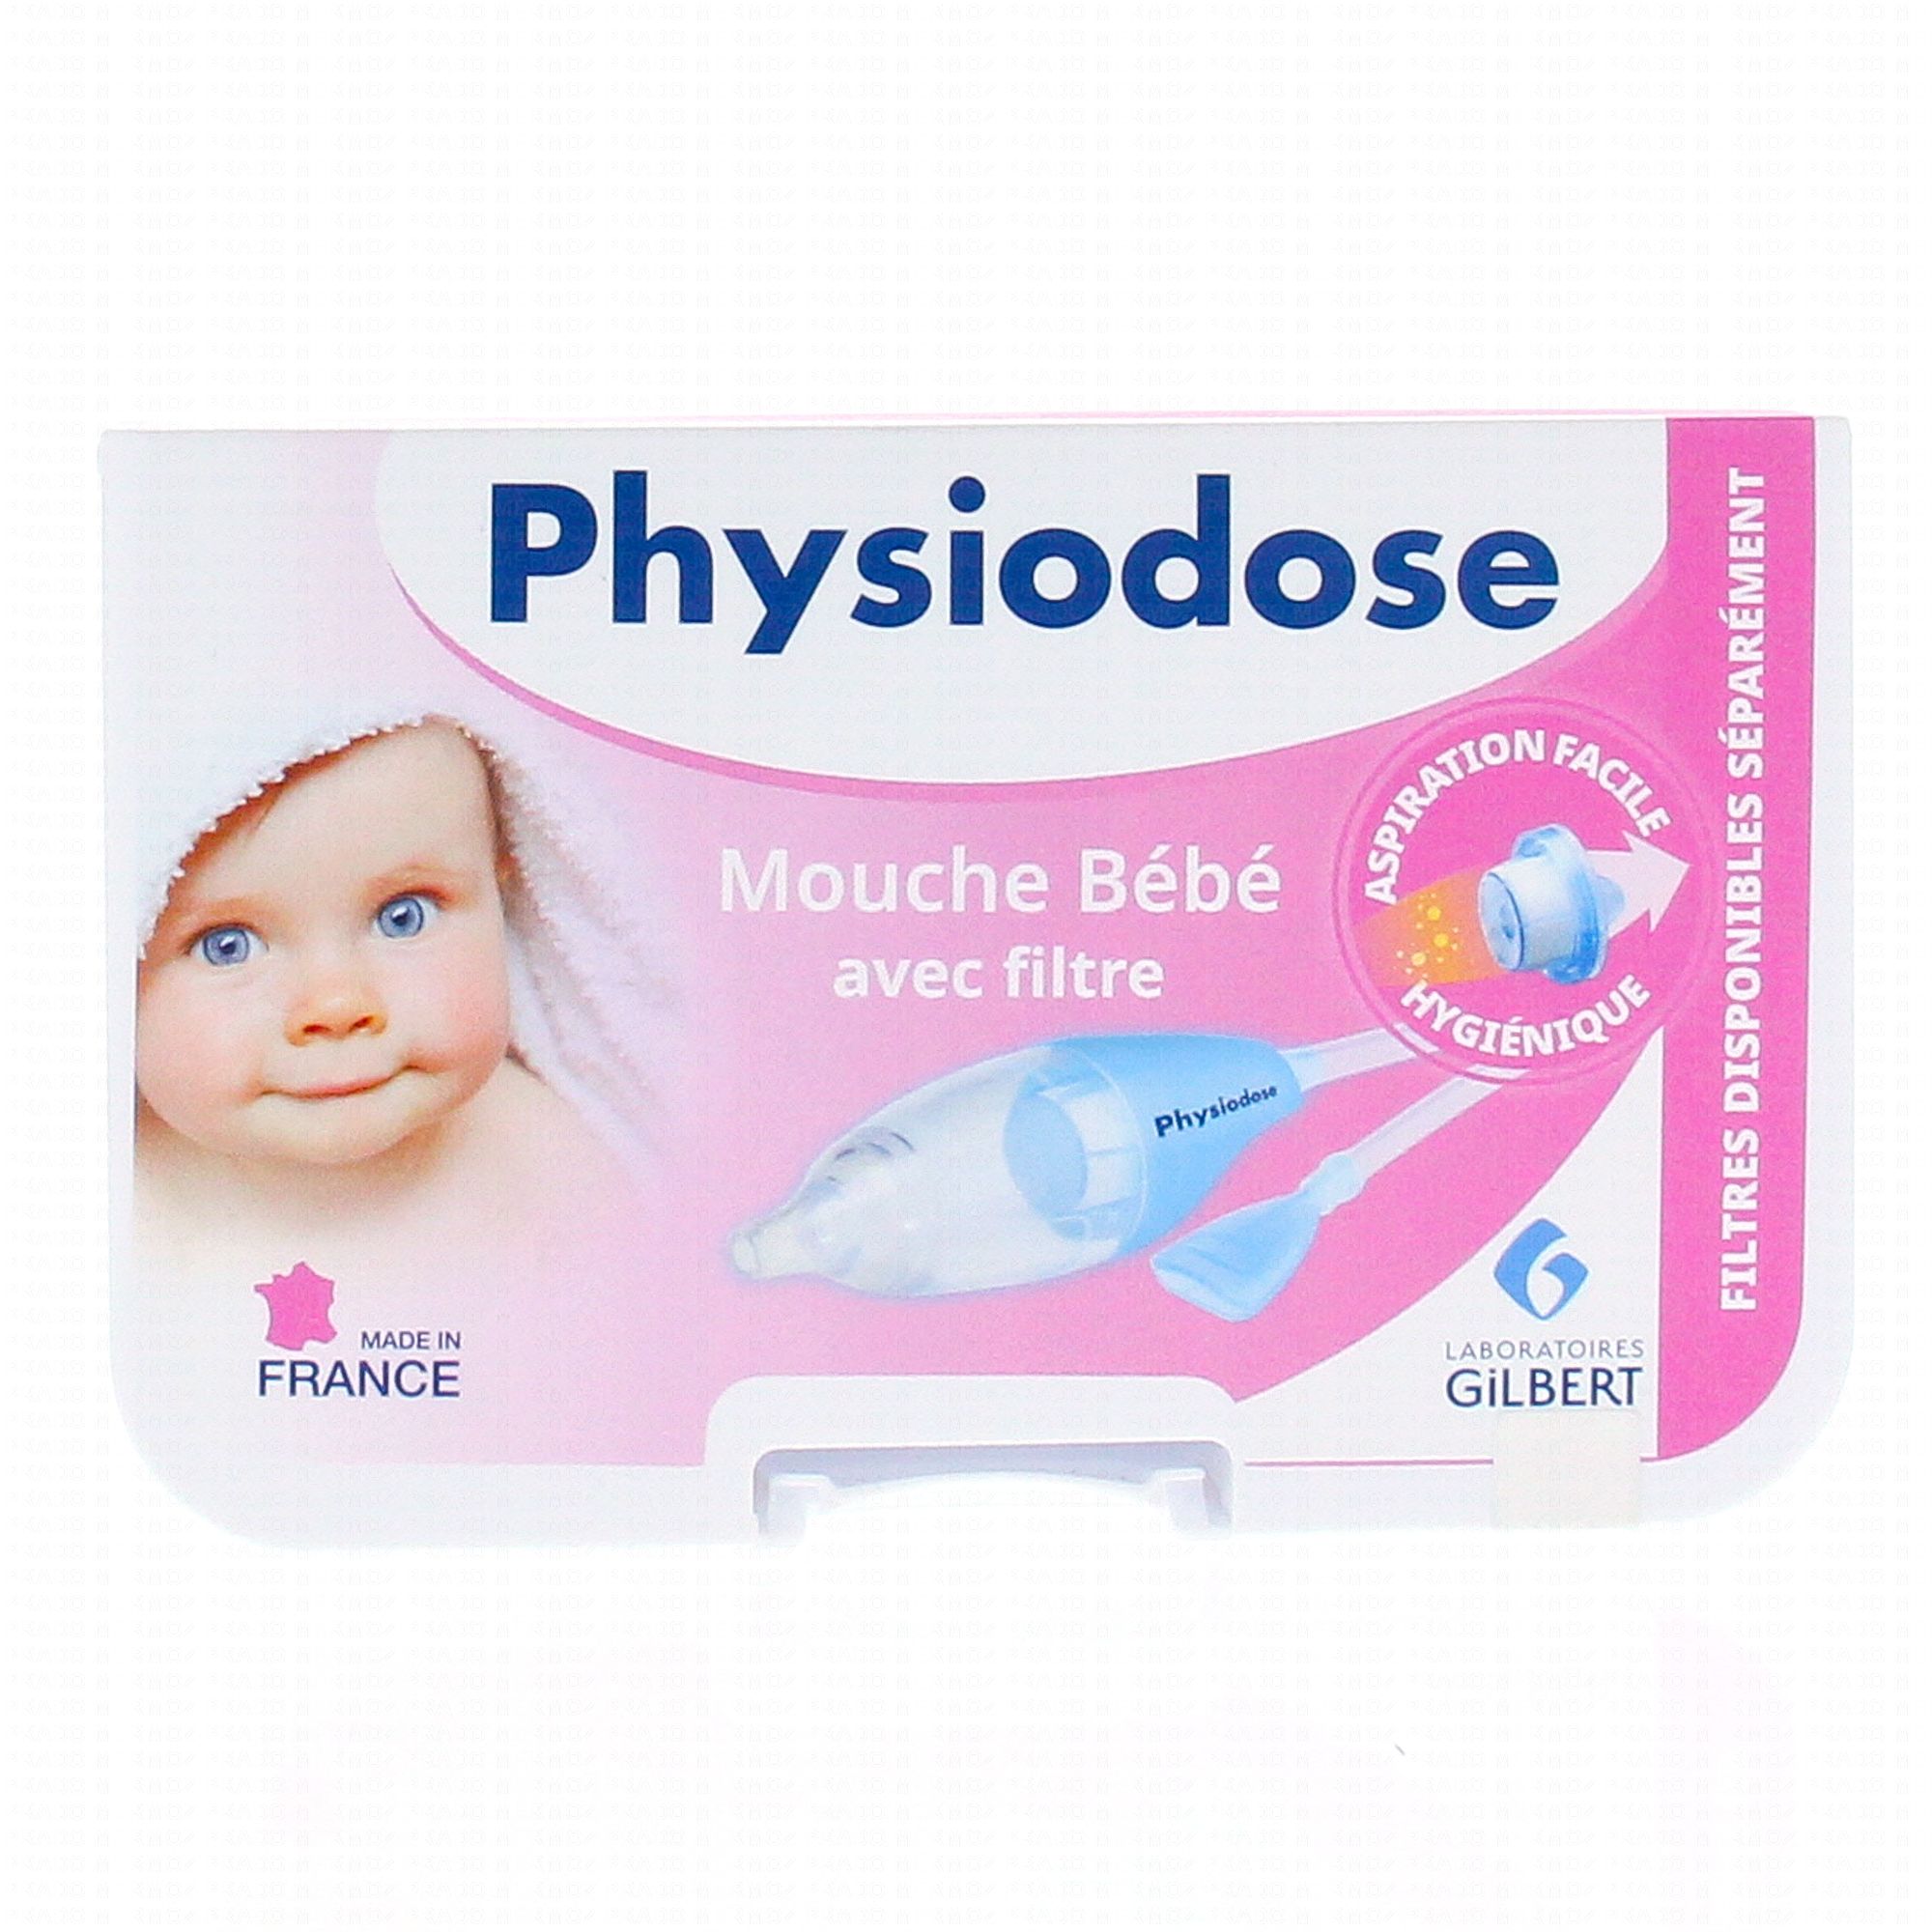 Filtre mouche bebe physiomer - Cdiscount